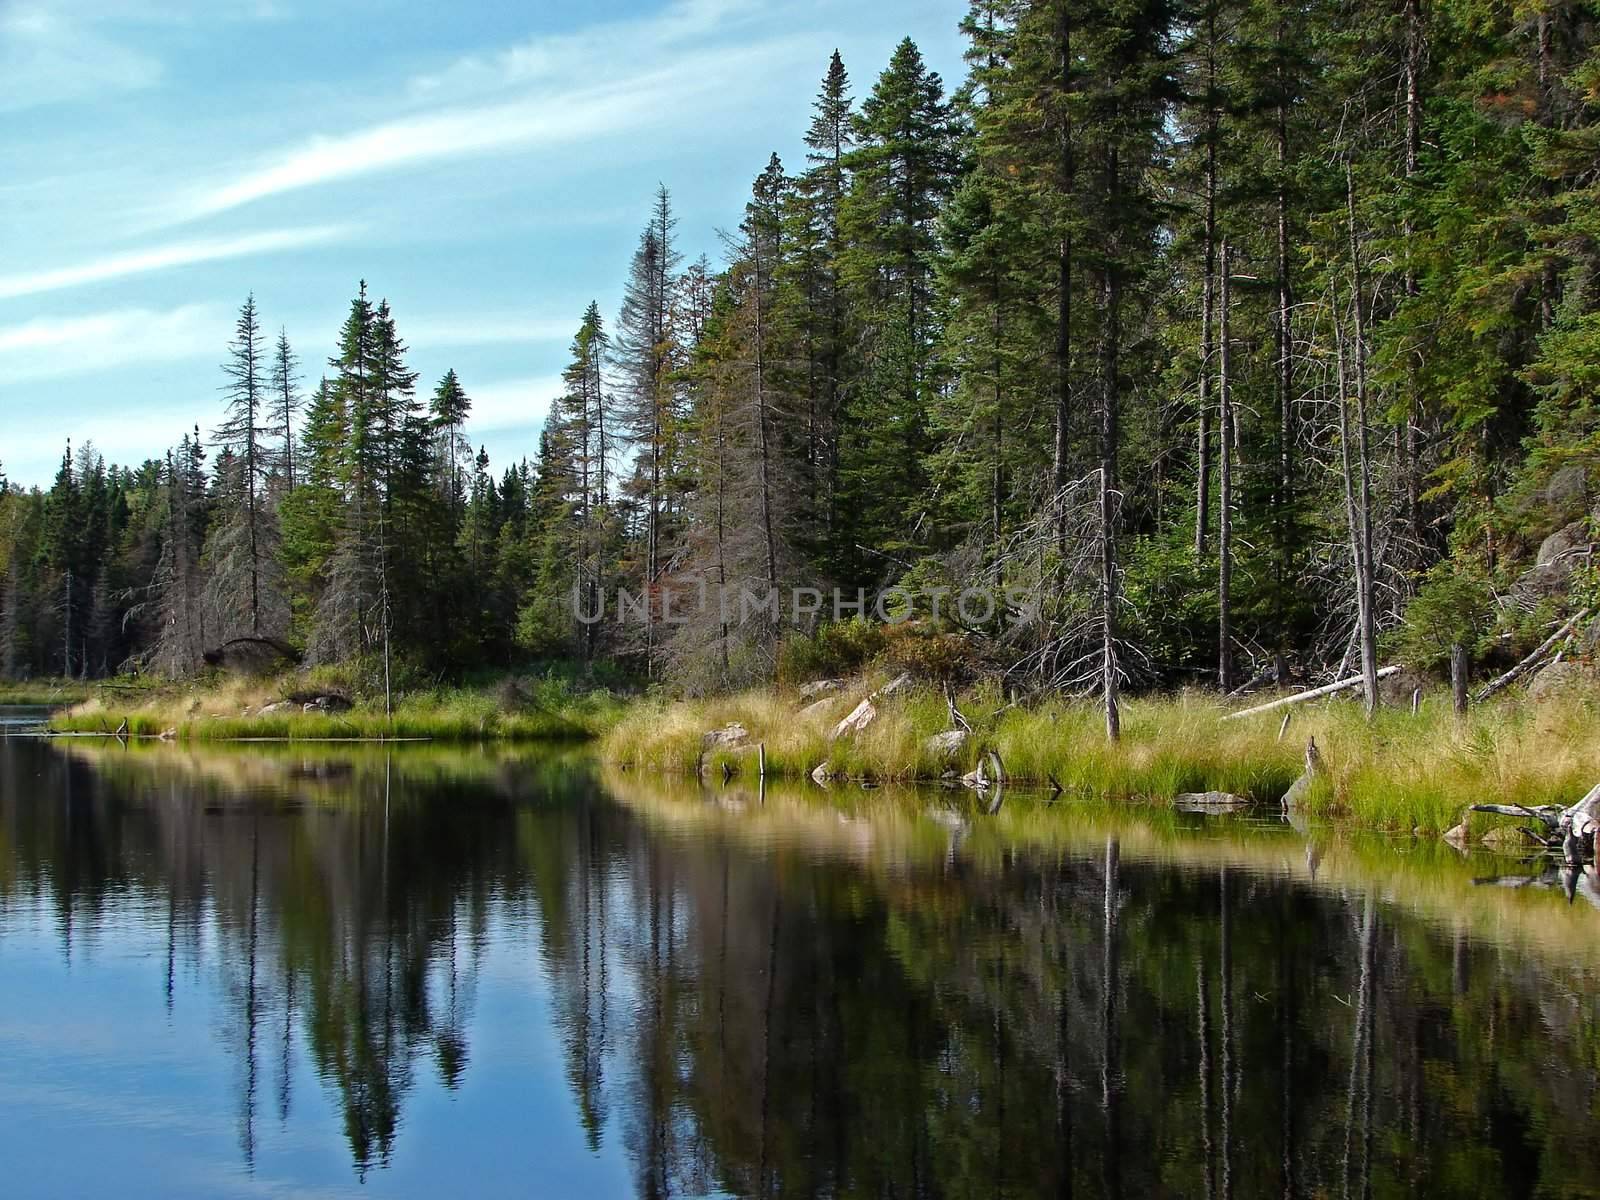 Northern lake and coniferous trees by Mirage3